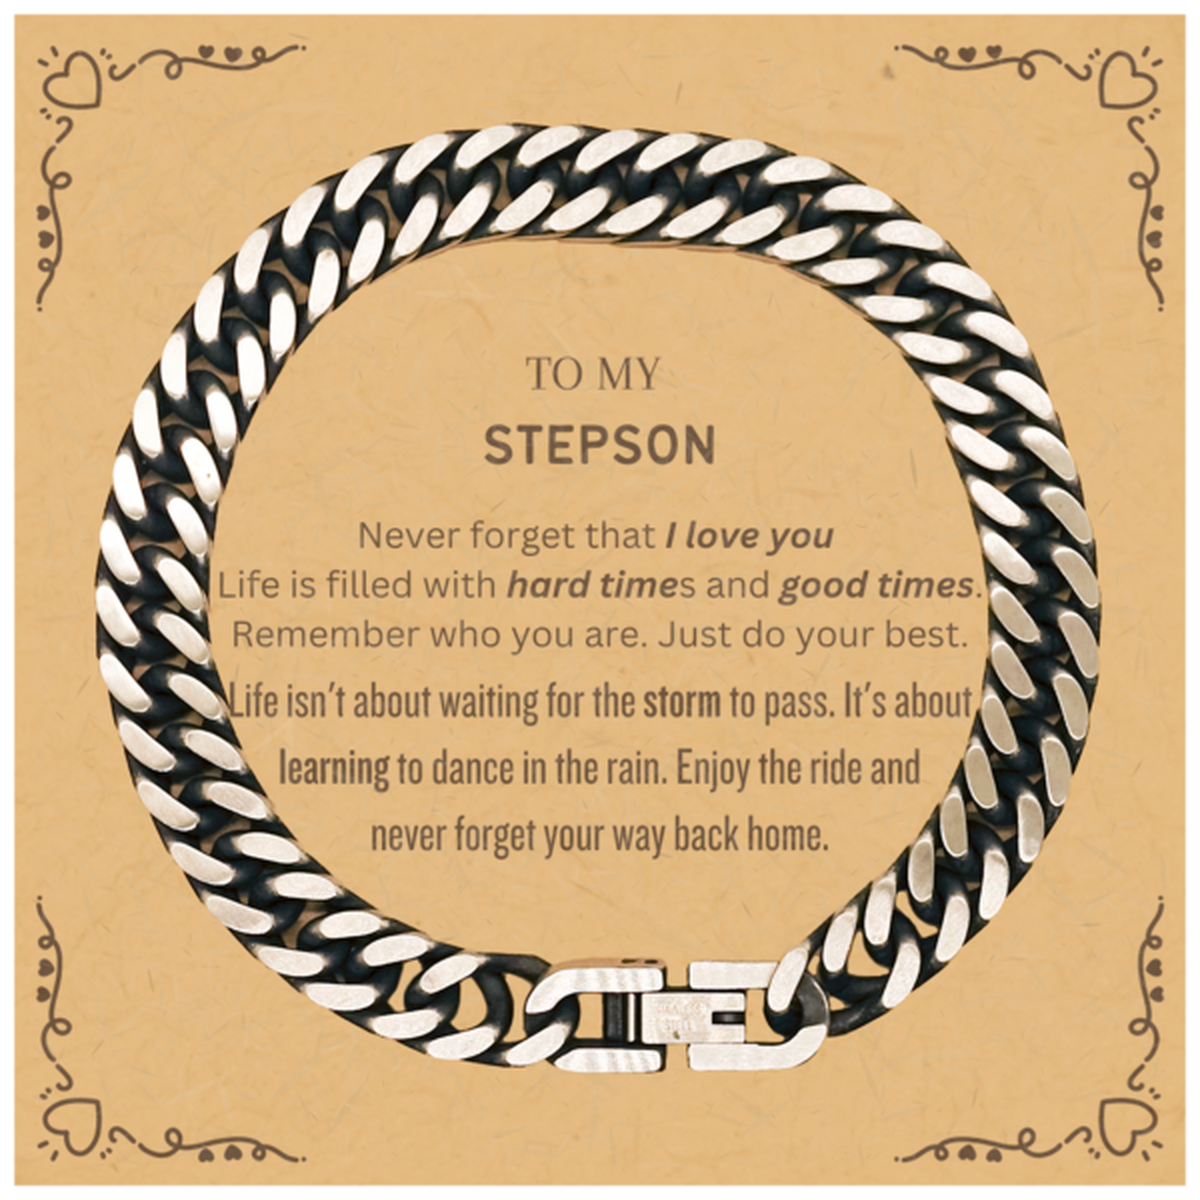 Christmas Stepson Cuban Link Chain Bracelet Gifts, To My Stepson Birthday Thank You Gifts For Stepson, Graduation Unique Gifts For Stepson To My Stepson Never forget that I love you life is filled with hard times and good times. Remember who you are. Just